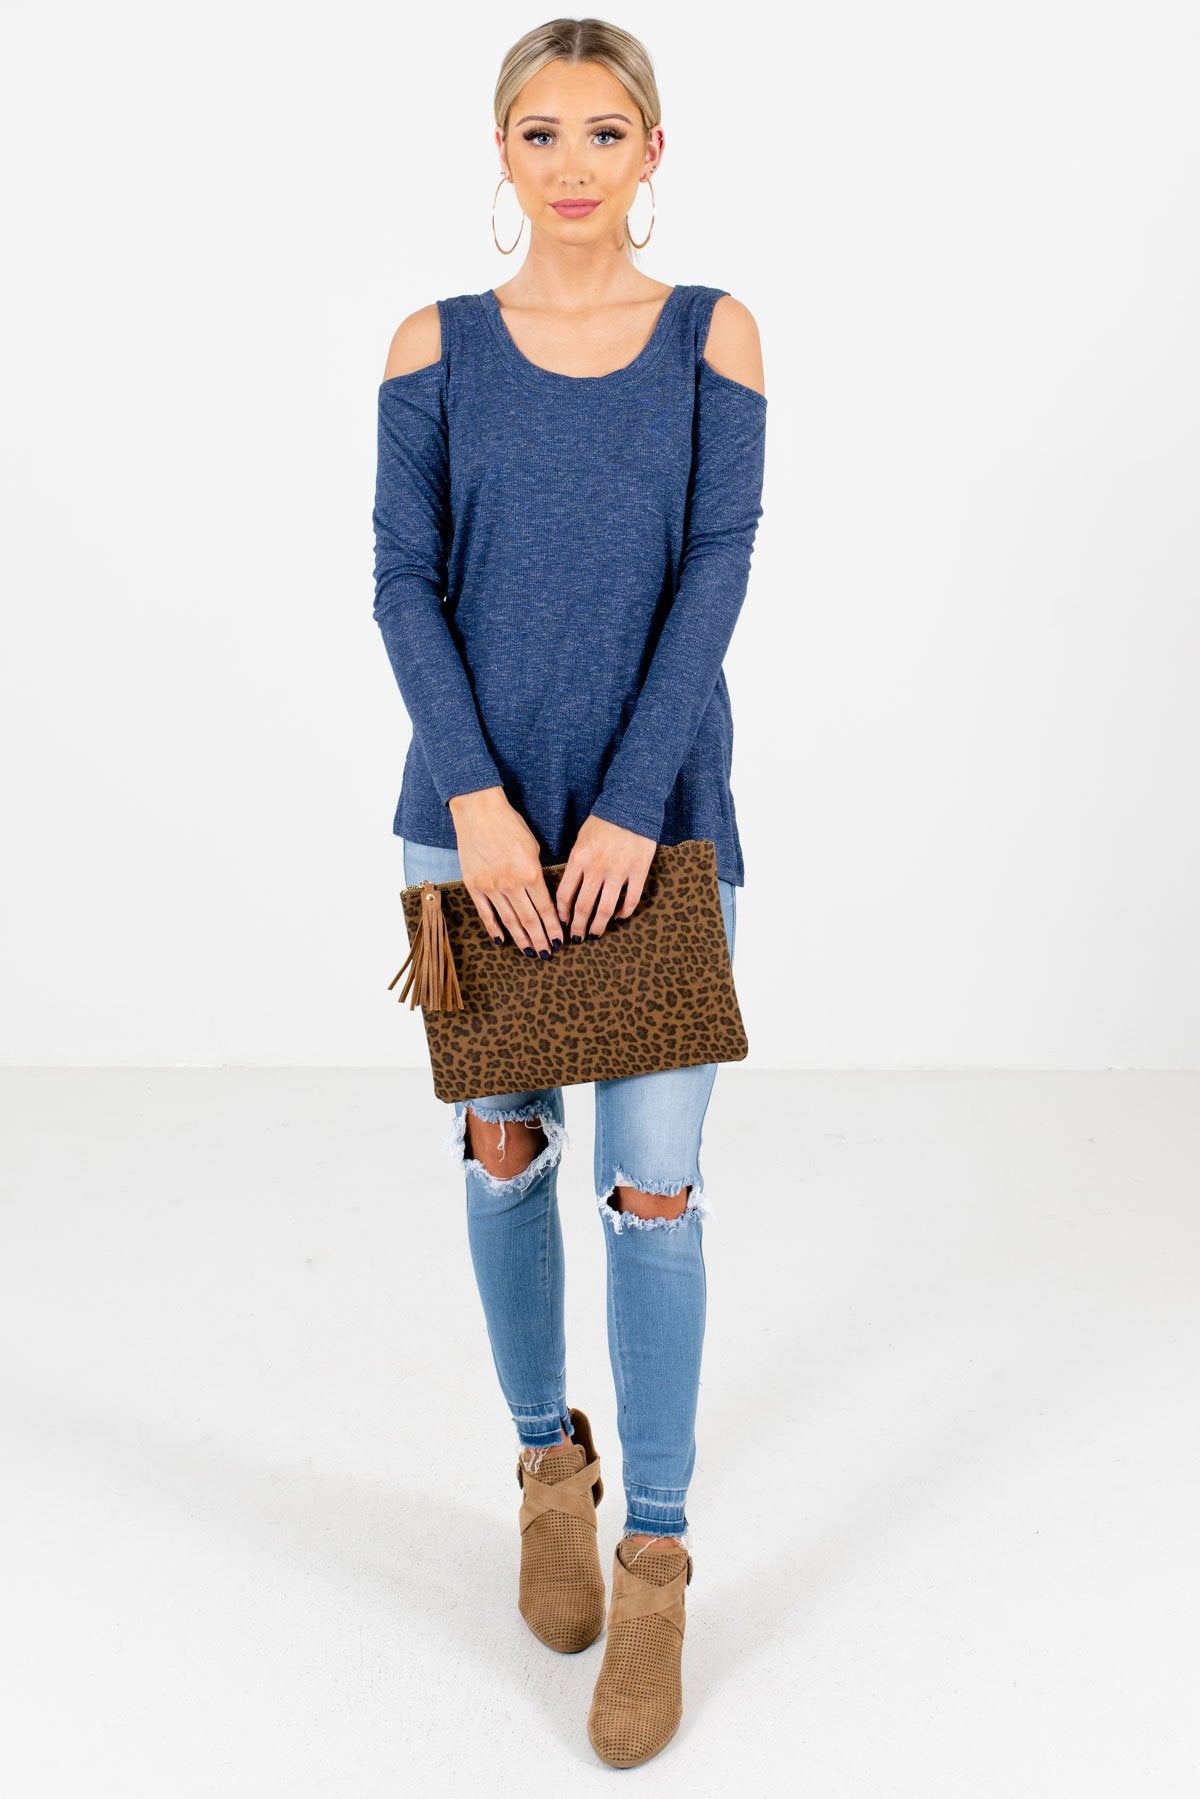 Women’s Blue Fall and Winter Boutique Clothing